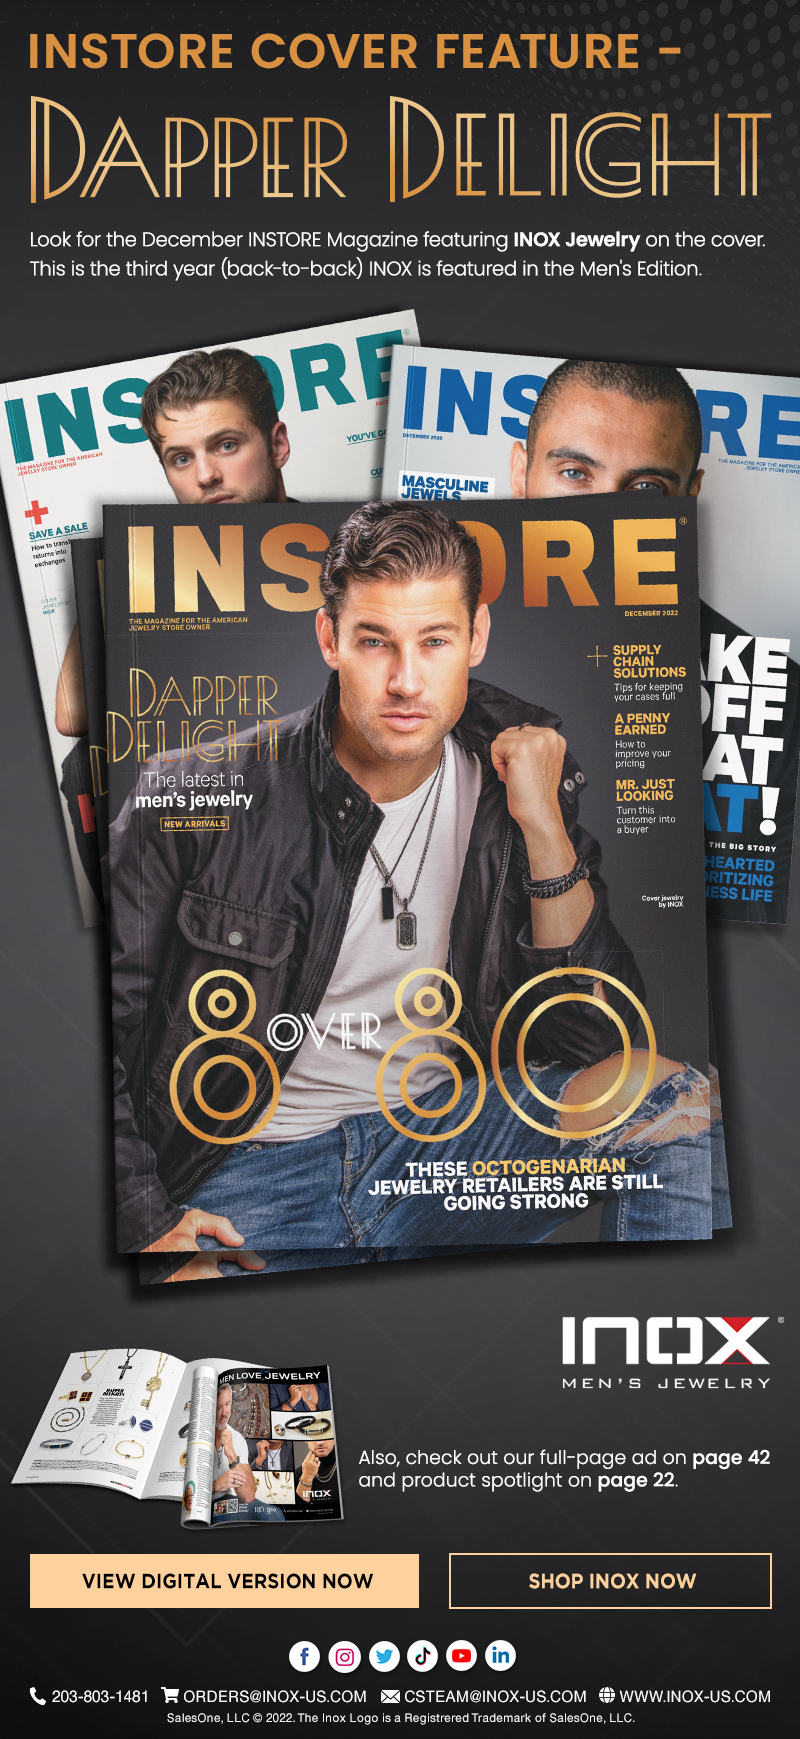 Look for INOX Jewelry at the INSTORE Magazine December 2022 Cover